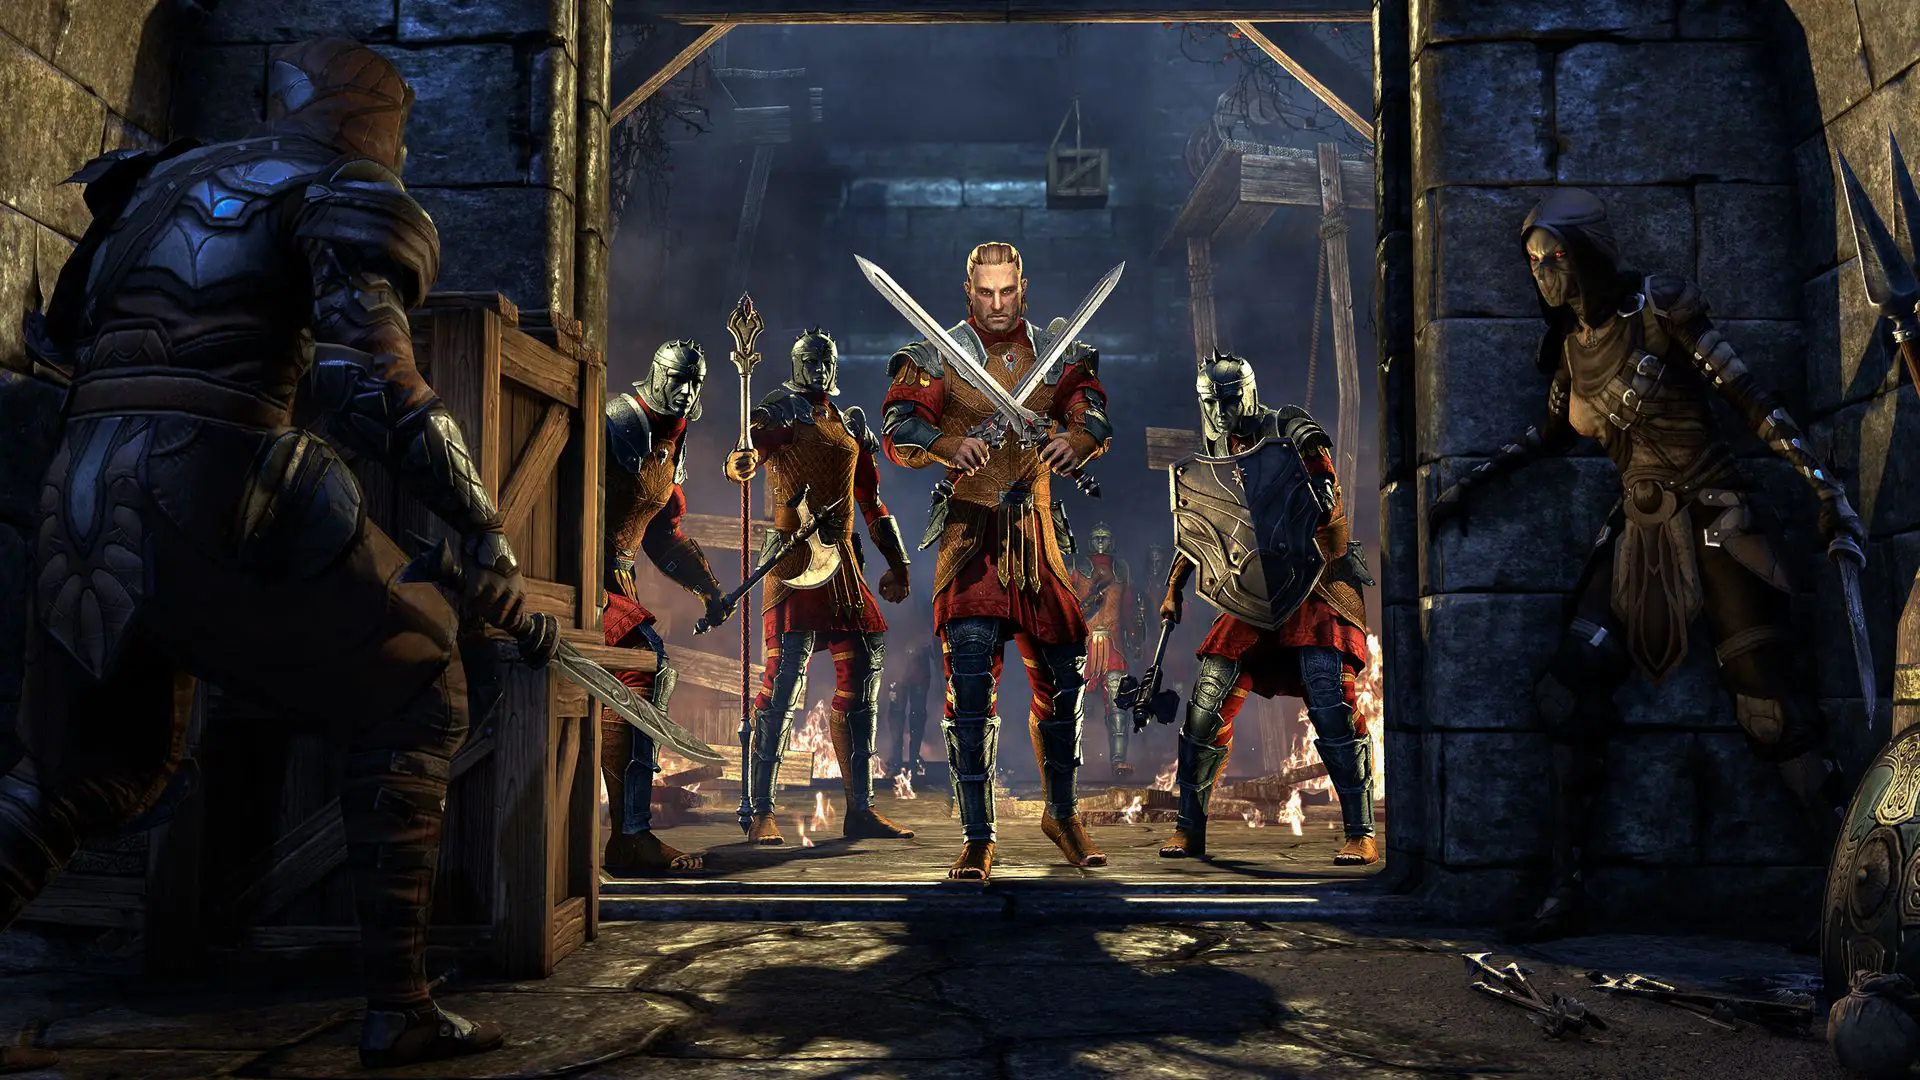 Free for All ESO Update 39 & PTS Patch Notes 9.1.0 - Deltia's Gaming